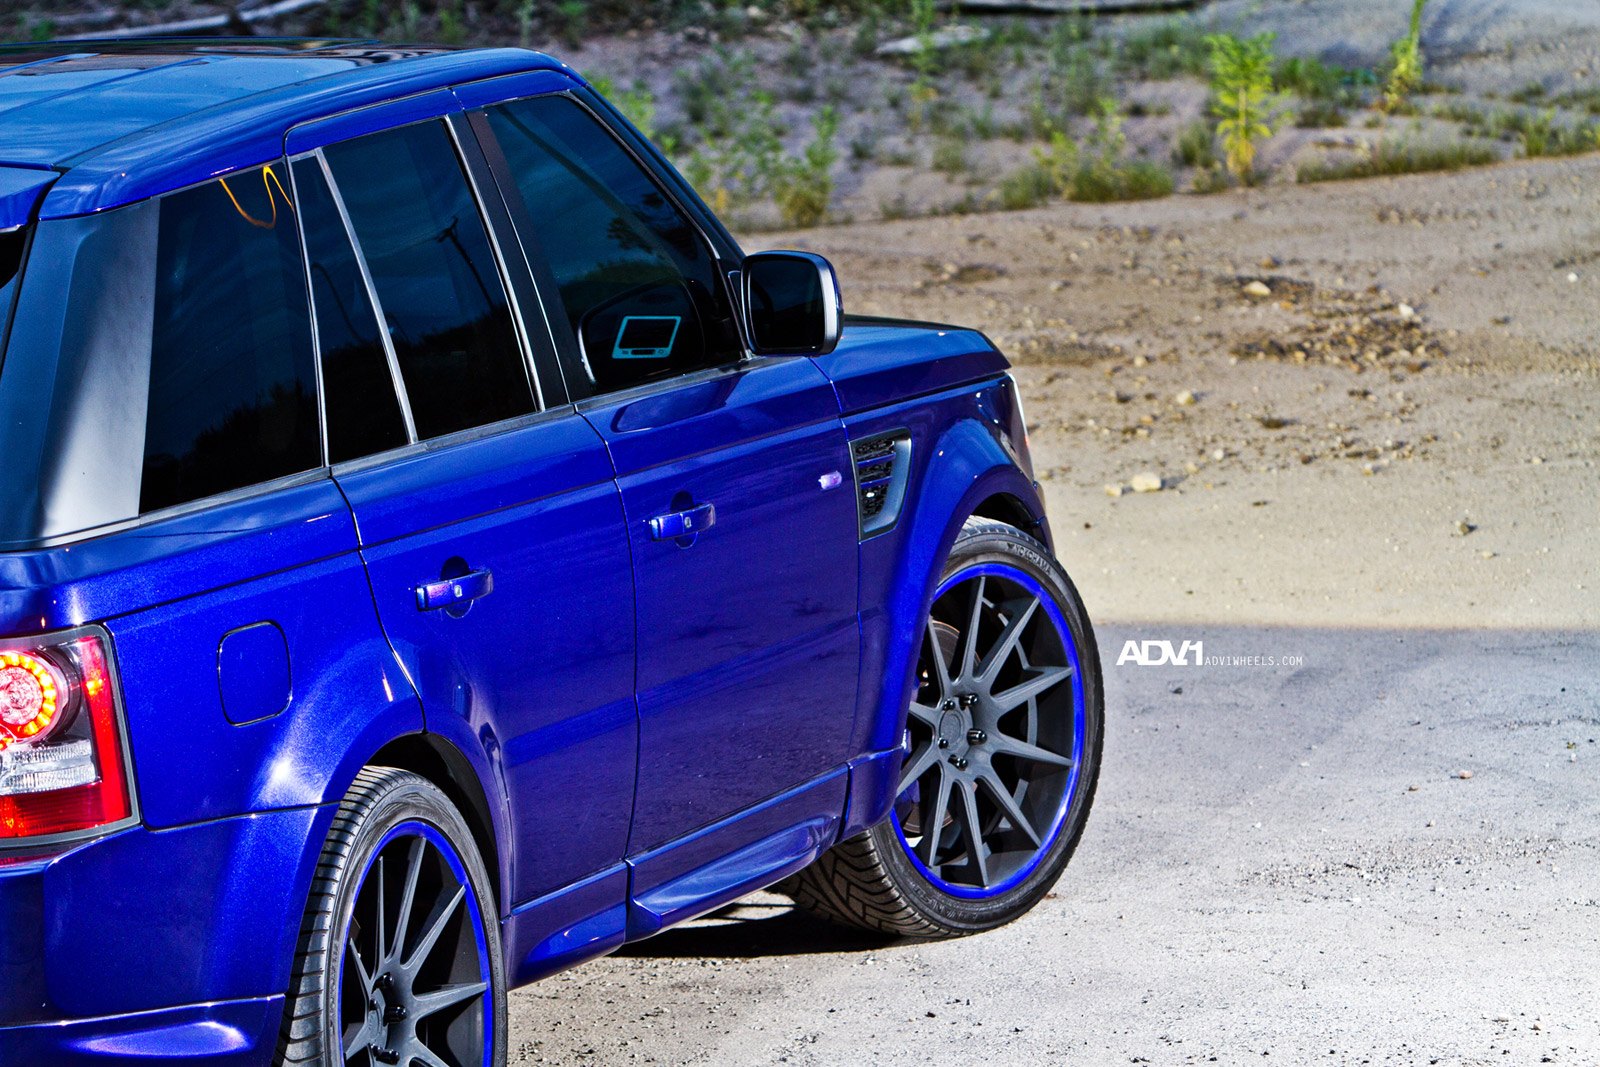 Blue Range Rover Sport with Red LED Taillights - Photo by ADV.1